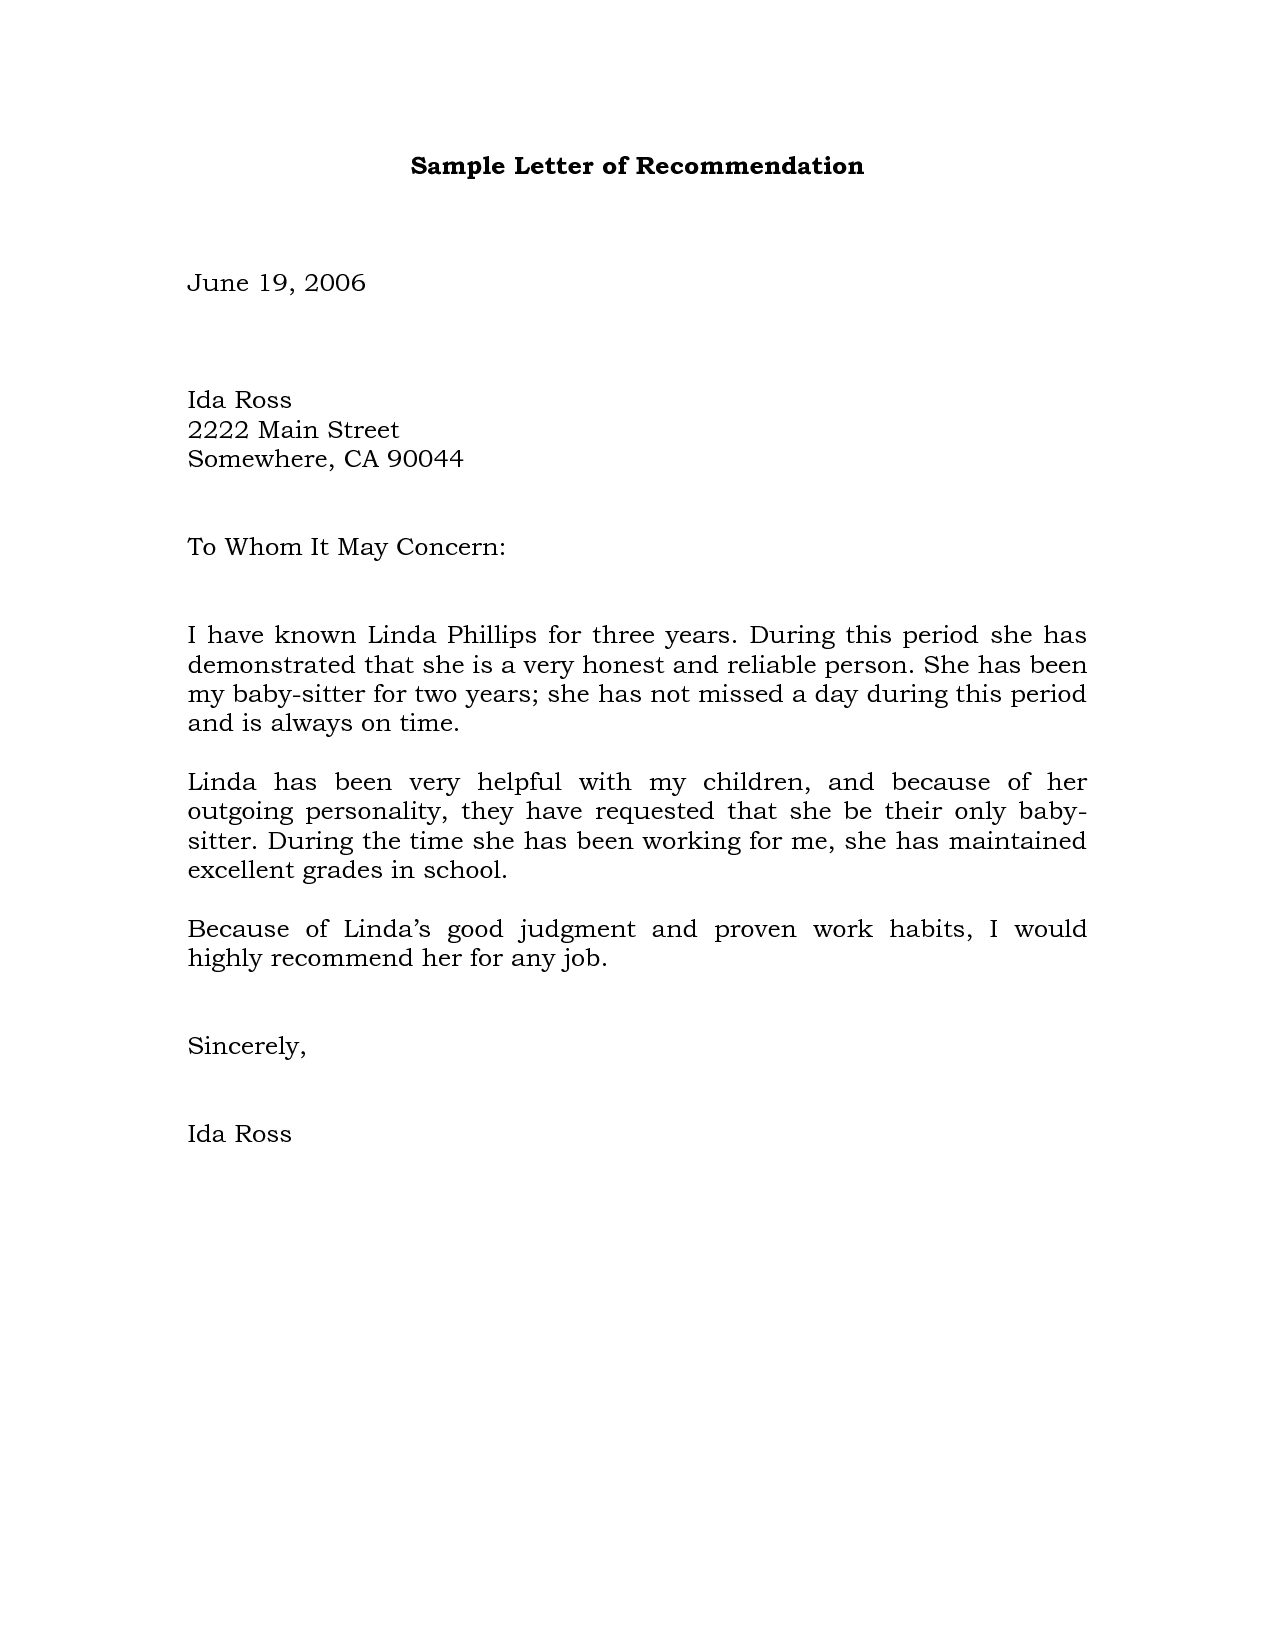 business referral letter template Collection-Sample Re mendation Letter Example 19-d